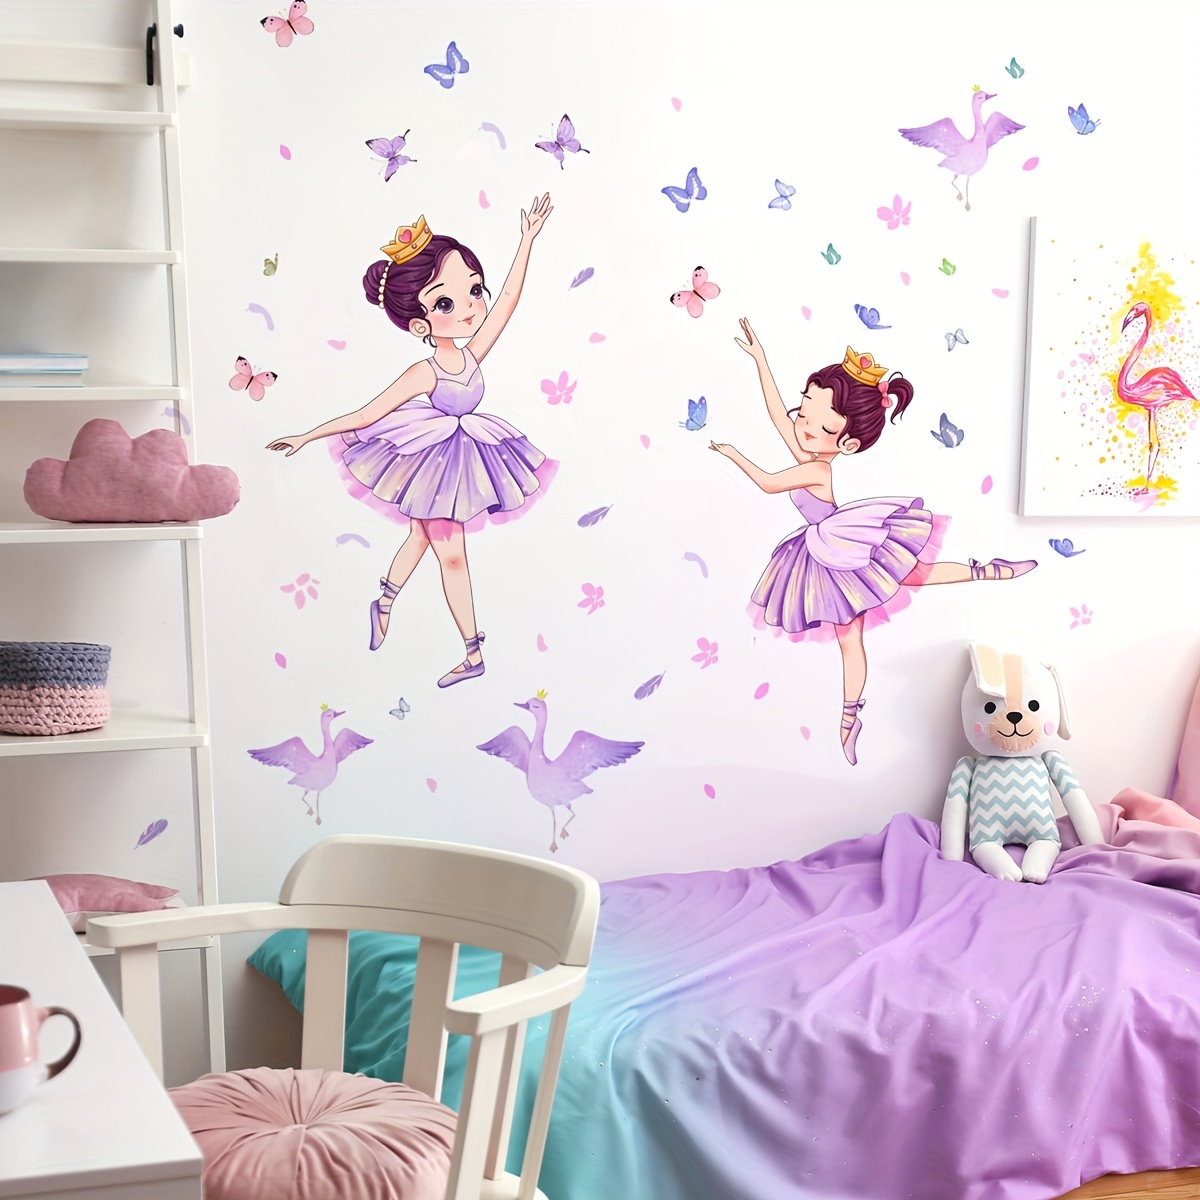 

1pc Dancing Girl And Butterflies Wall Decals, Self-adhesive Pvc Wall Stickers For Home And Bedroom Decor